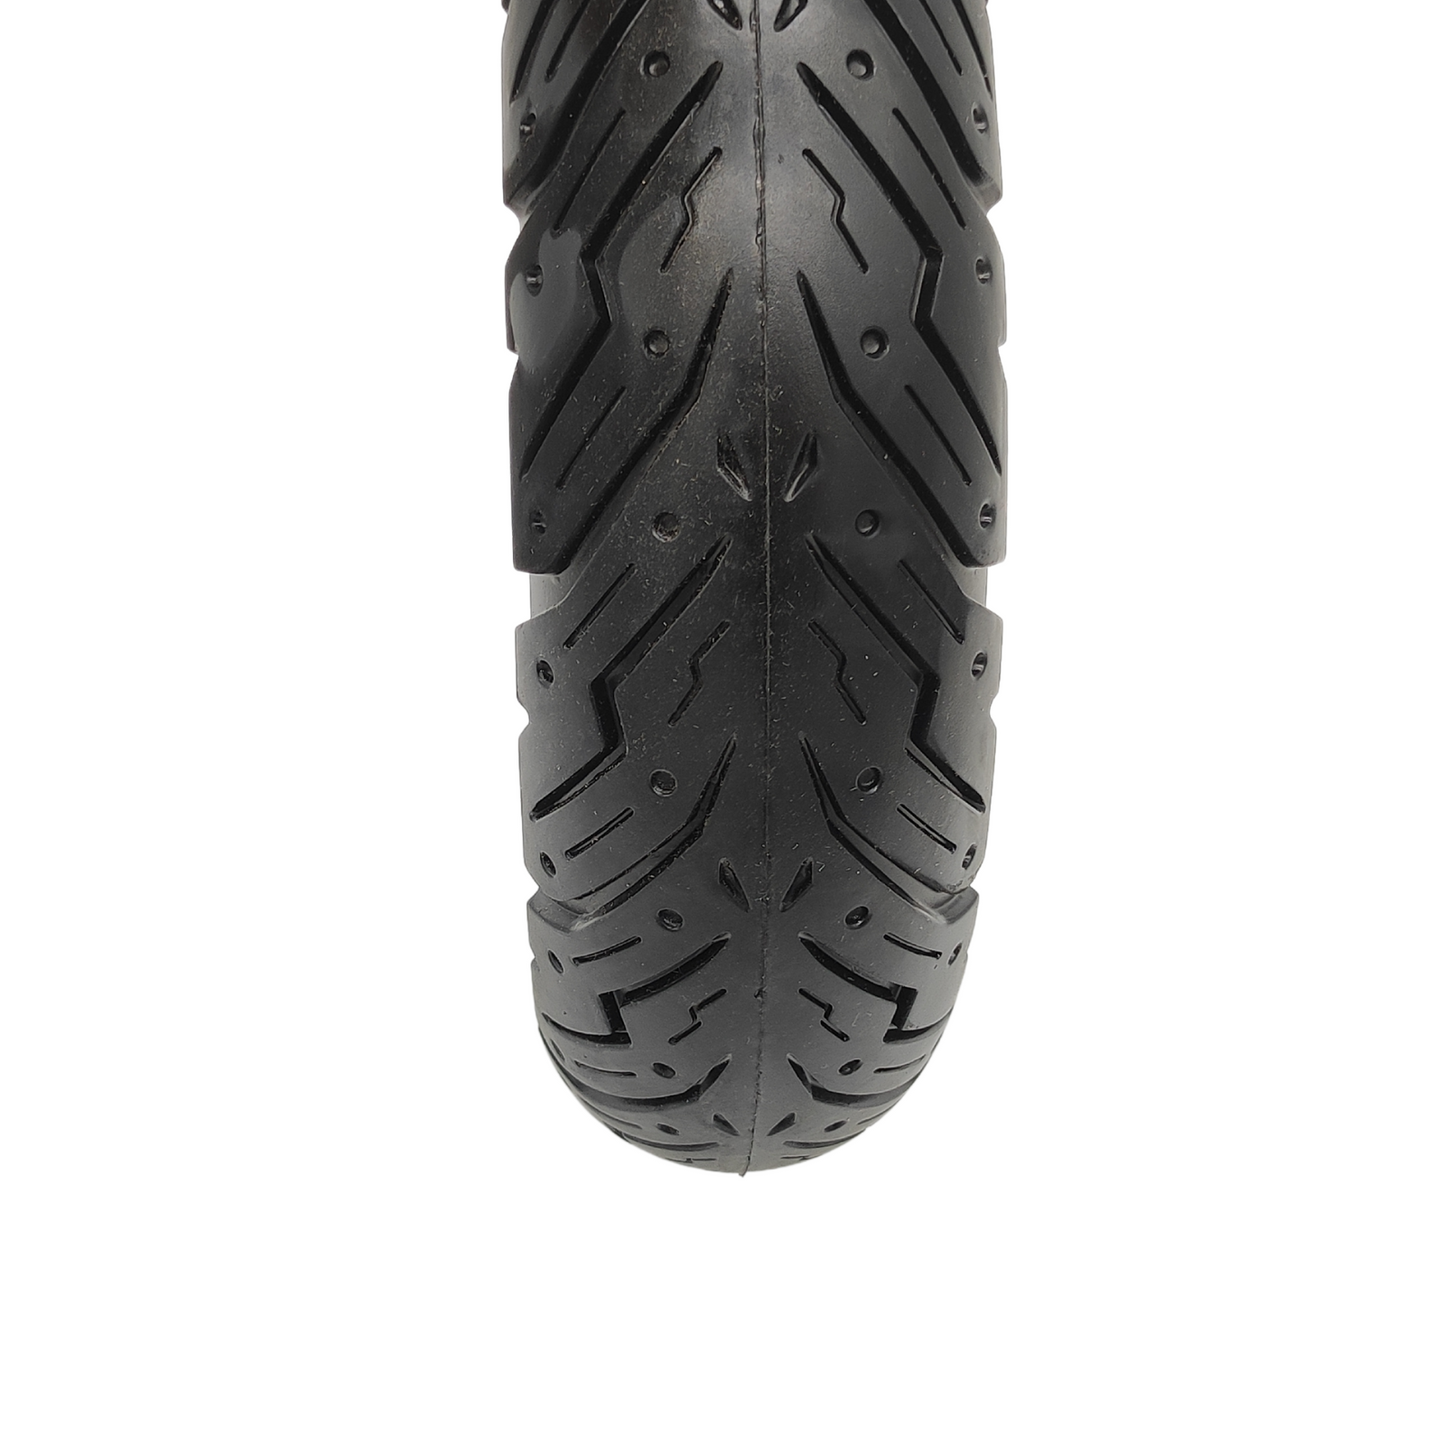 Odys Alpha X3 Pro solid rubber tire 10x2.5 60/70-6.5 44m